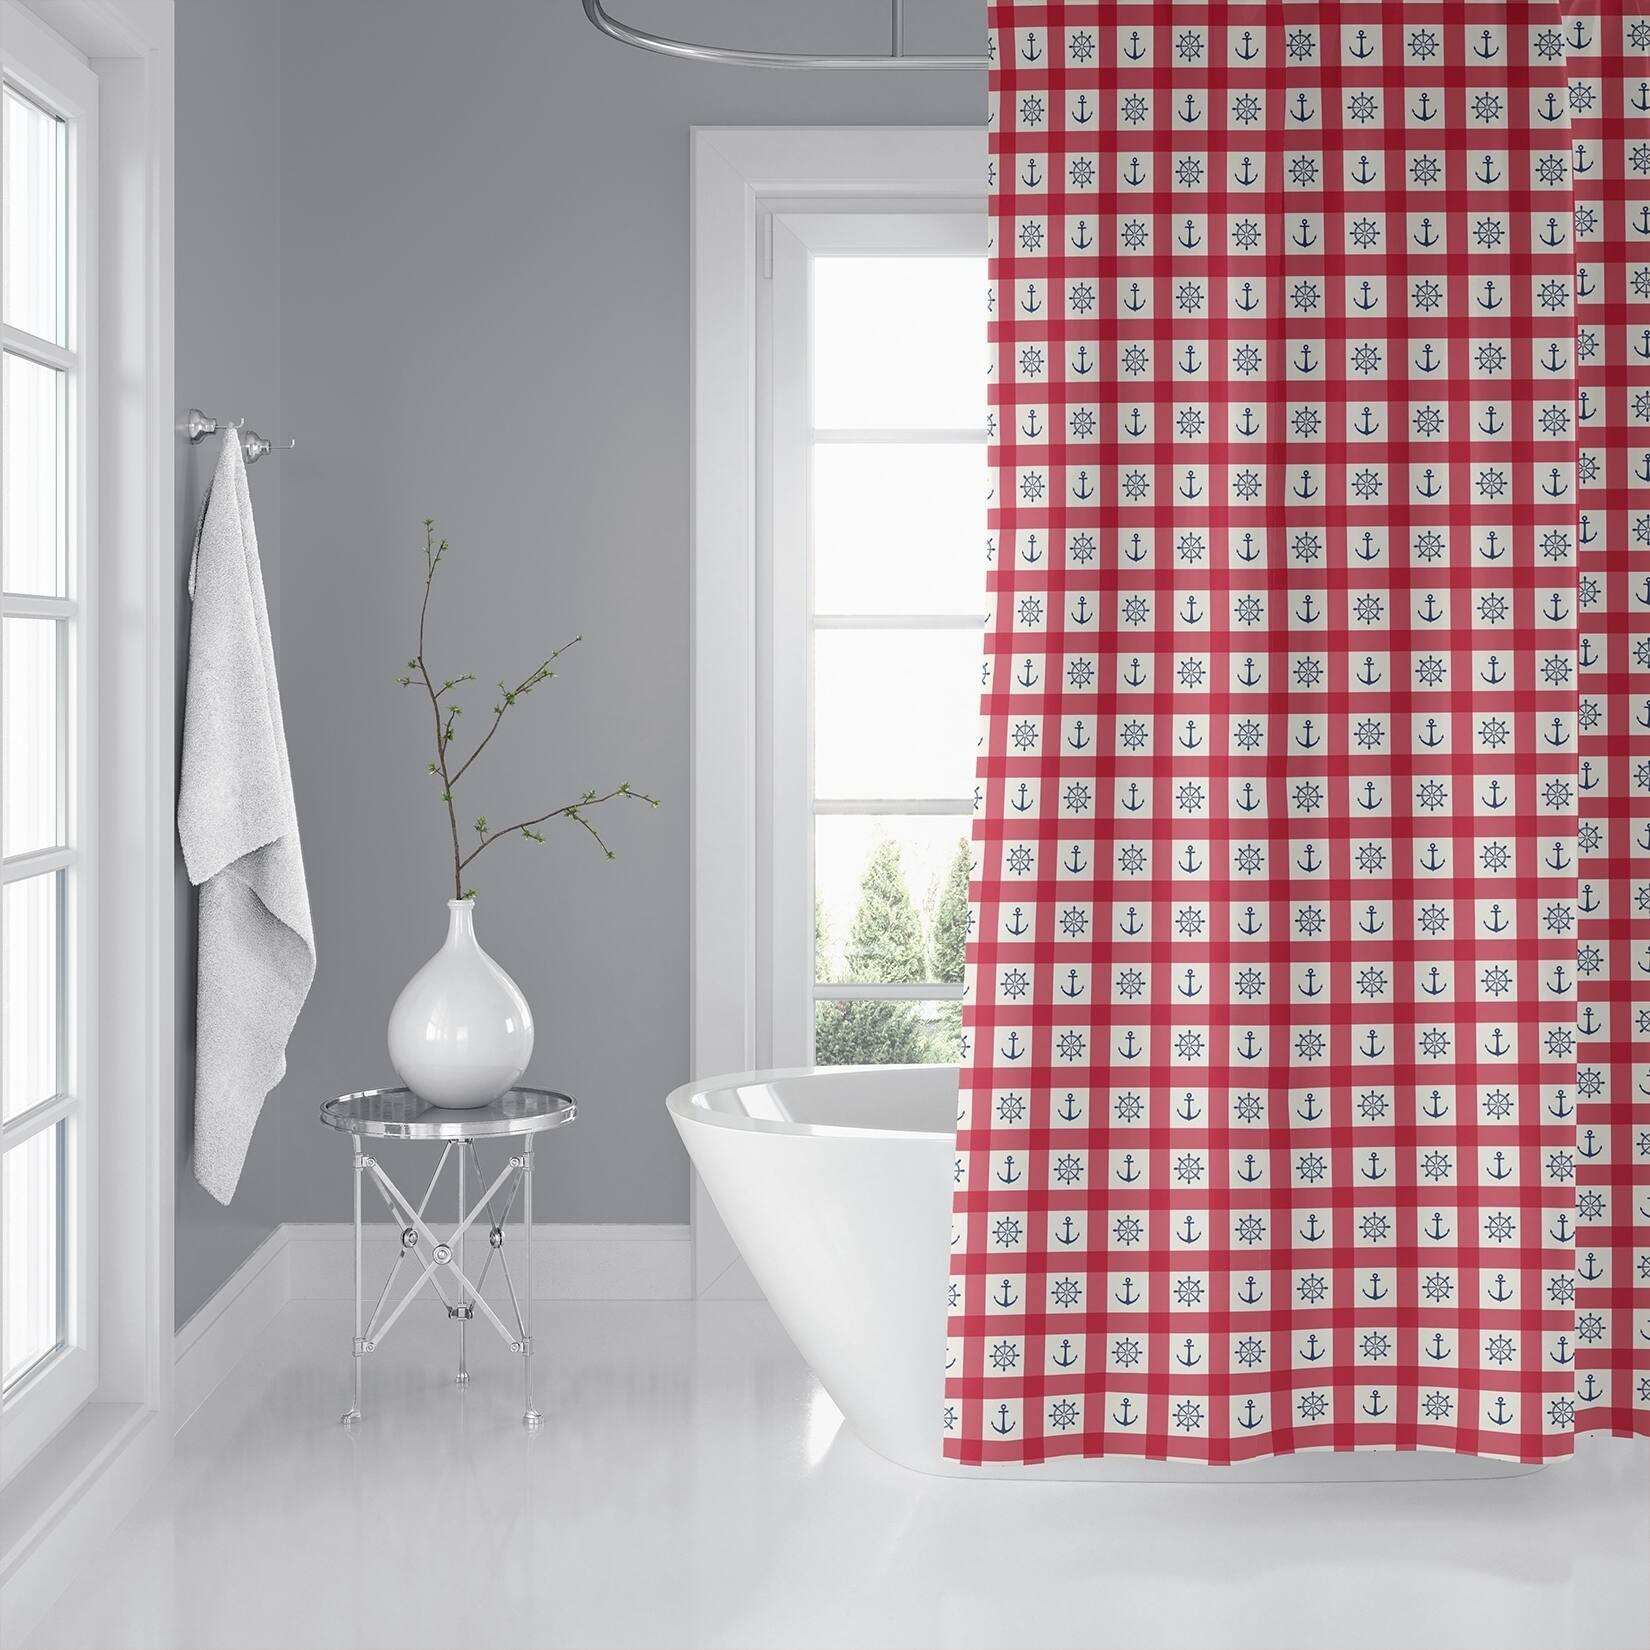 ANCHOR GALORE RED and BLUE Shower Curtain by Kavka Designs - 71X74